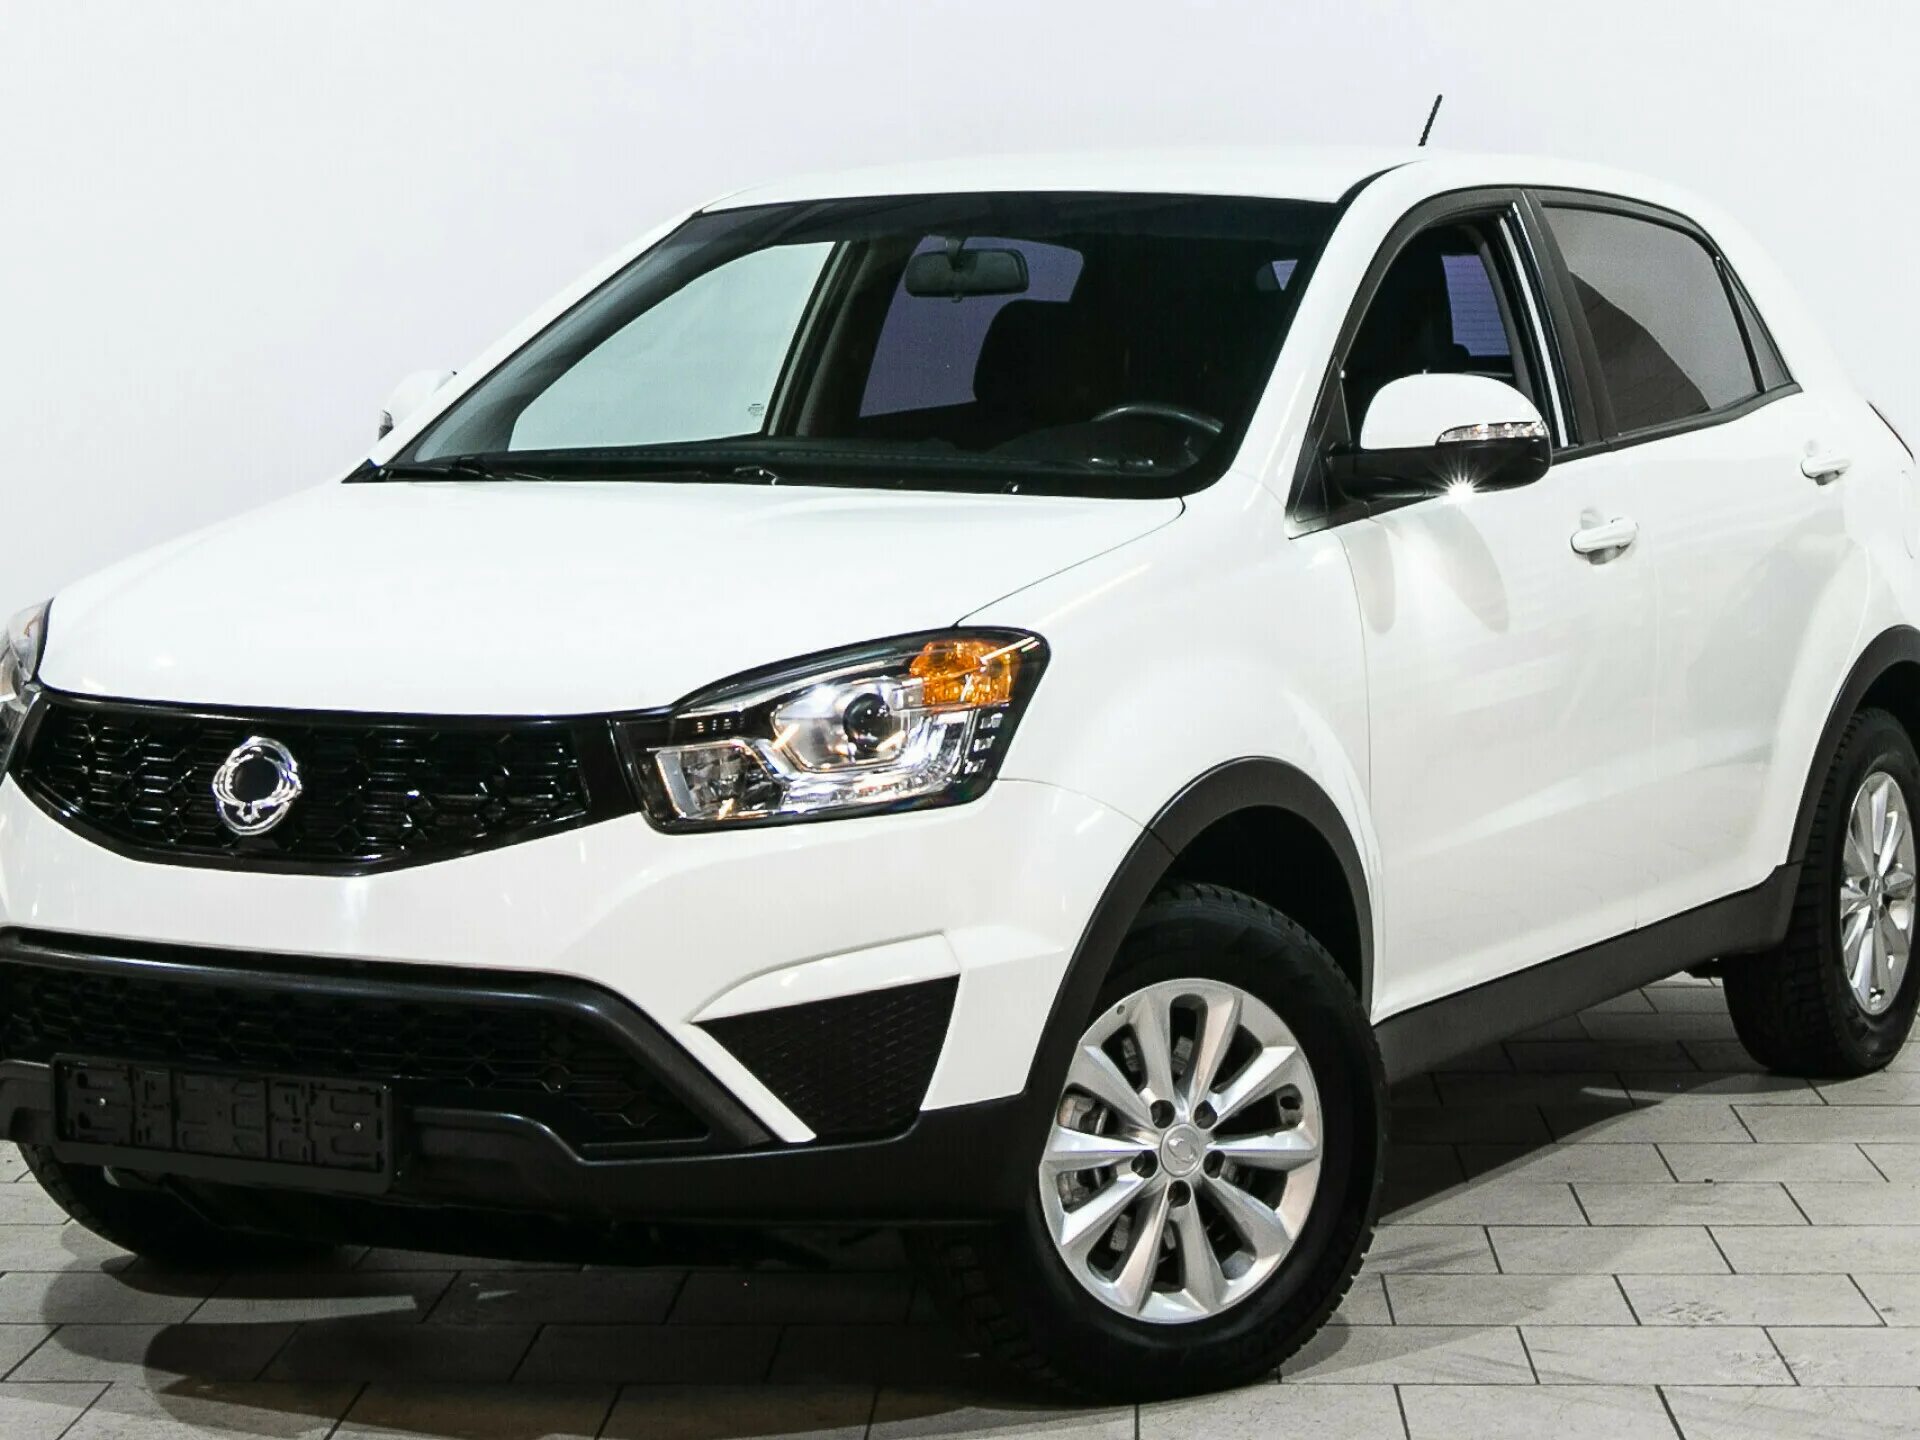 Ssangyong new actyon 2014. Саньенг Актион 2014. ССАНГЙОНГ Актион 2014. SSANGYONG Actyon, 2014 белый. SSANGYONG Actyon 2.